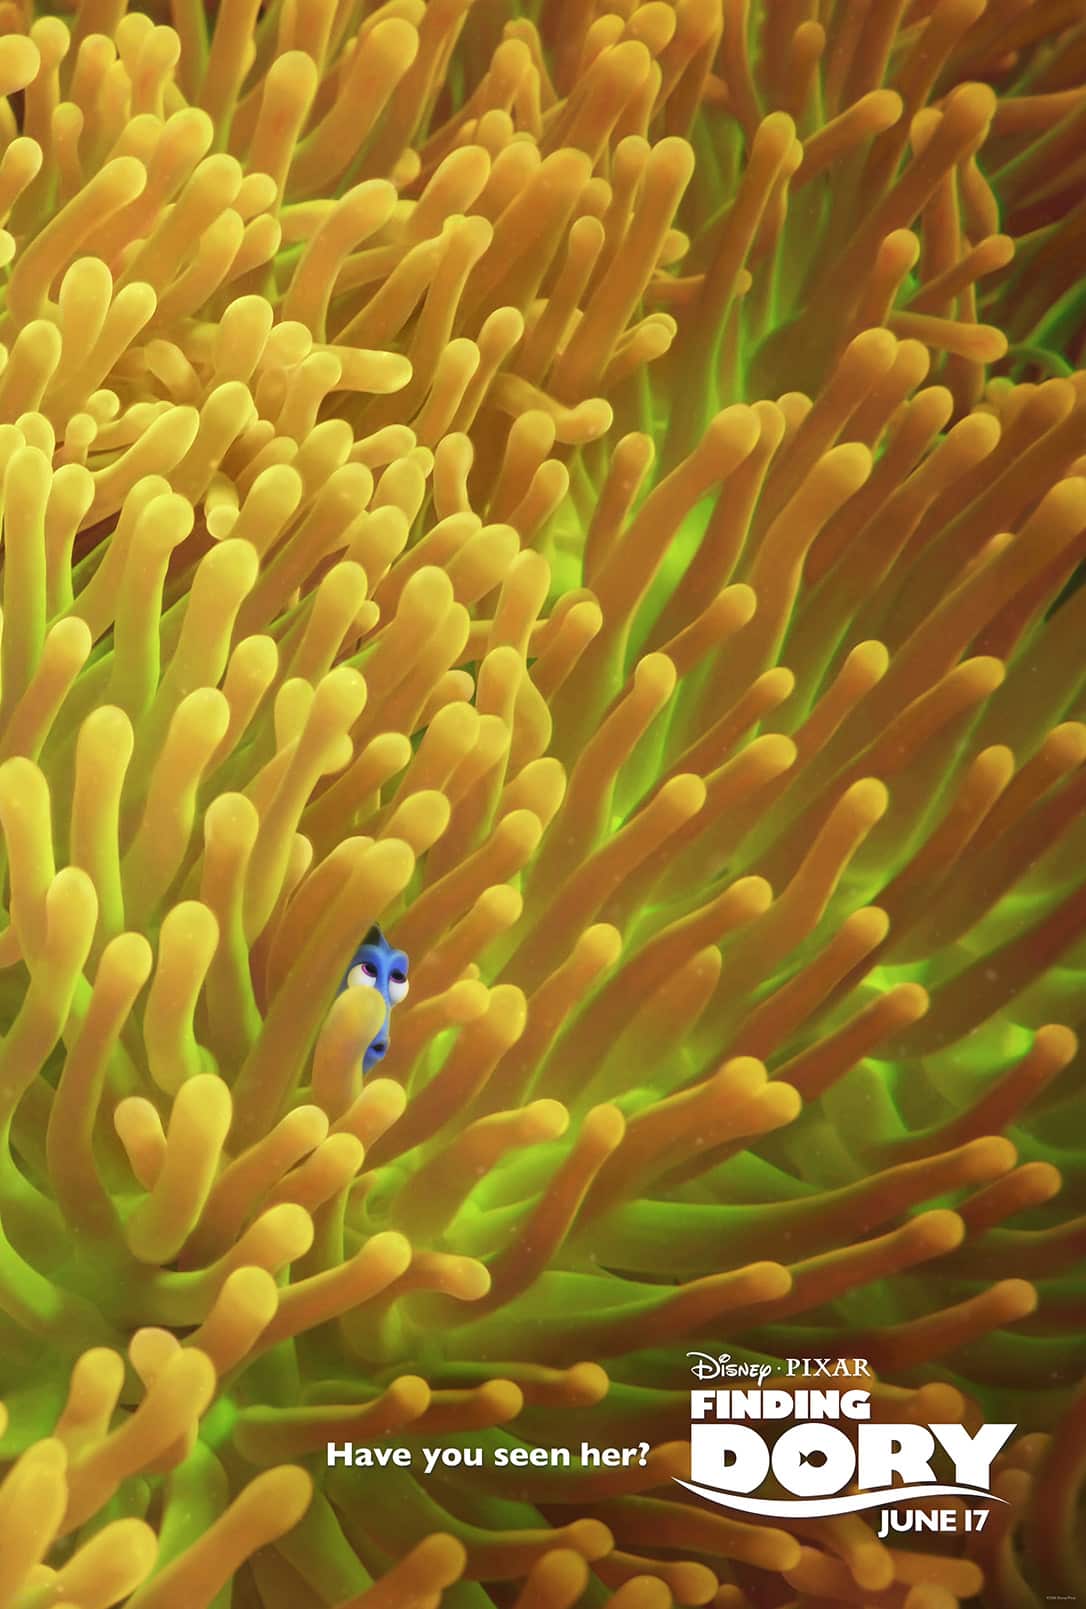 Finding Dory in theaters on June 17 #FindingDory